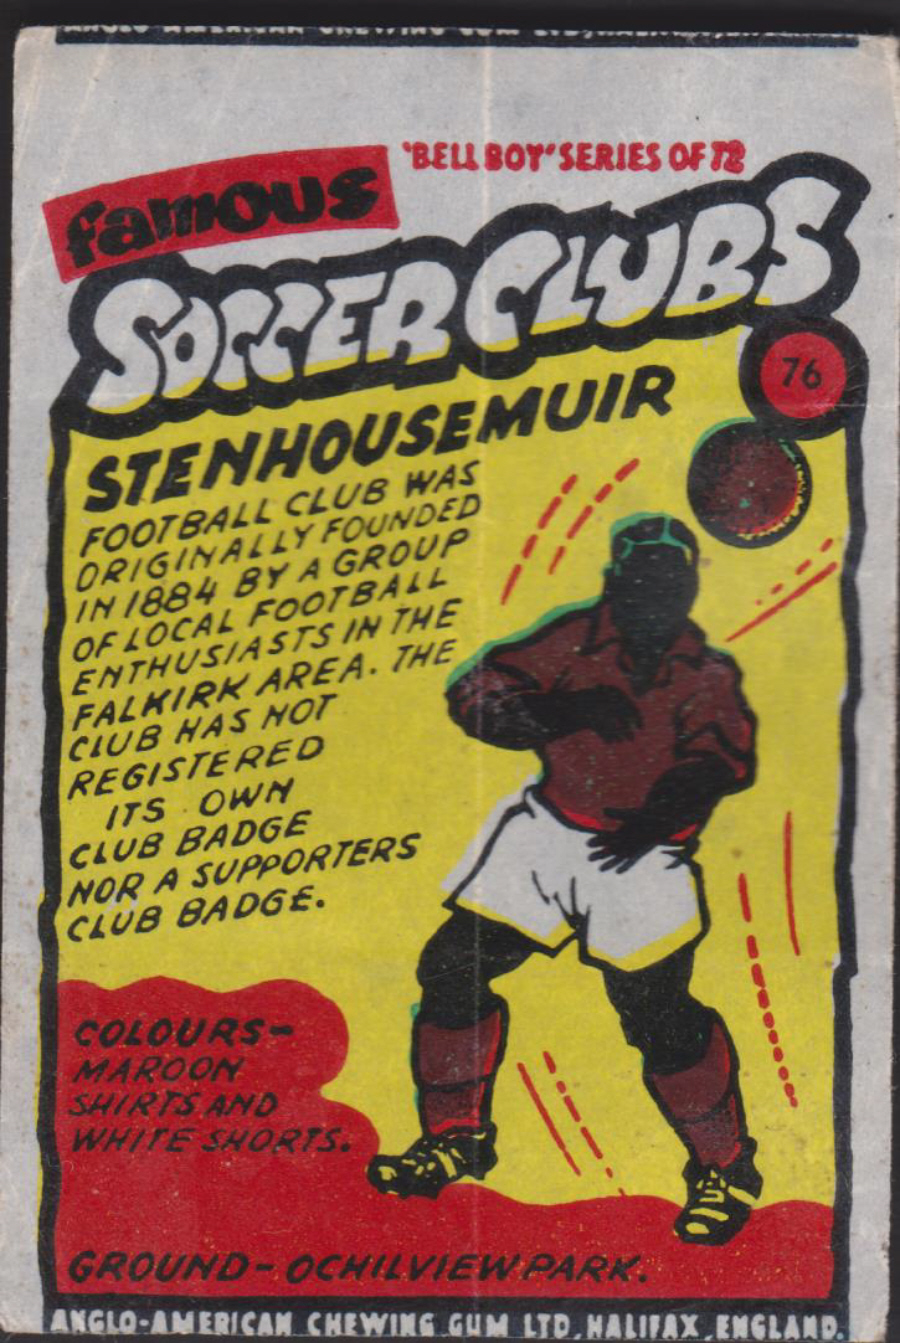 Anglo-American-Chewing-Gum-Wax-Wrapper-Famous-Soccer-Clubs-No-76 -Stenhousemuir